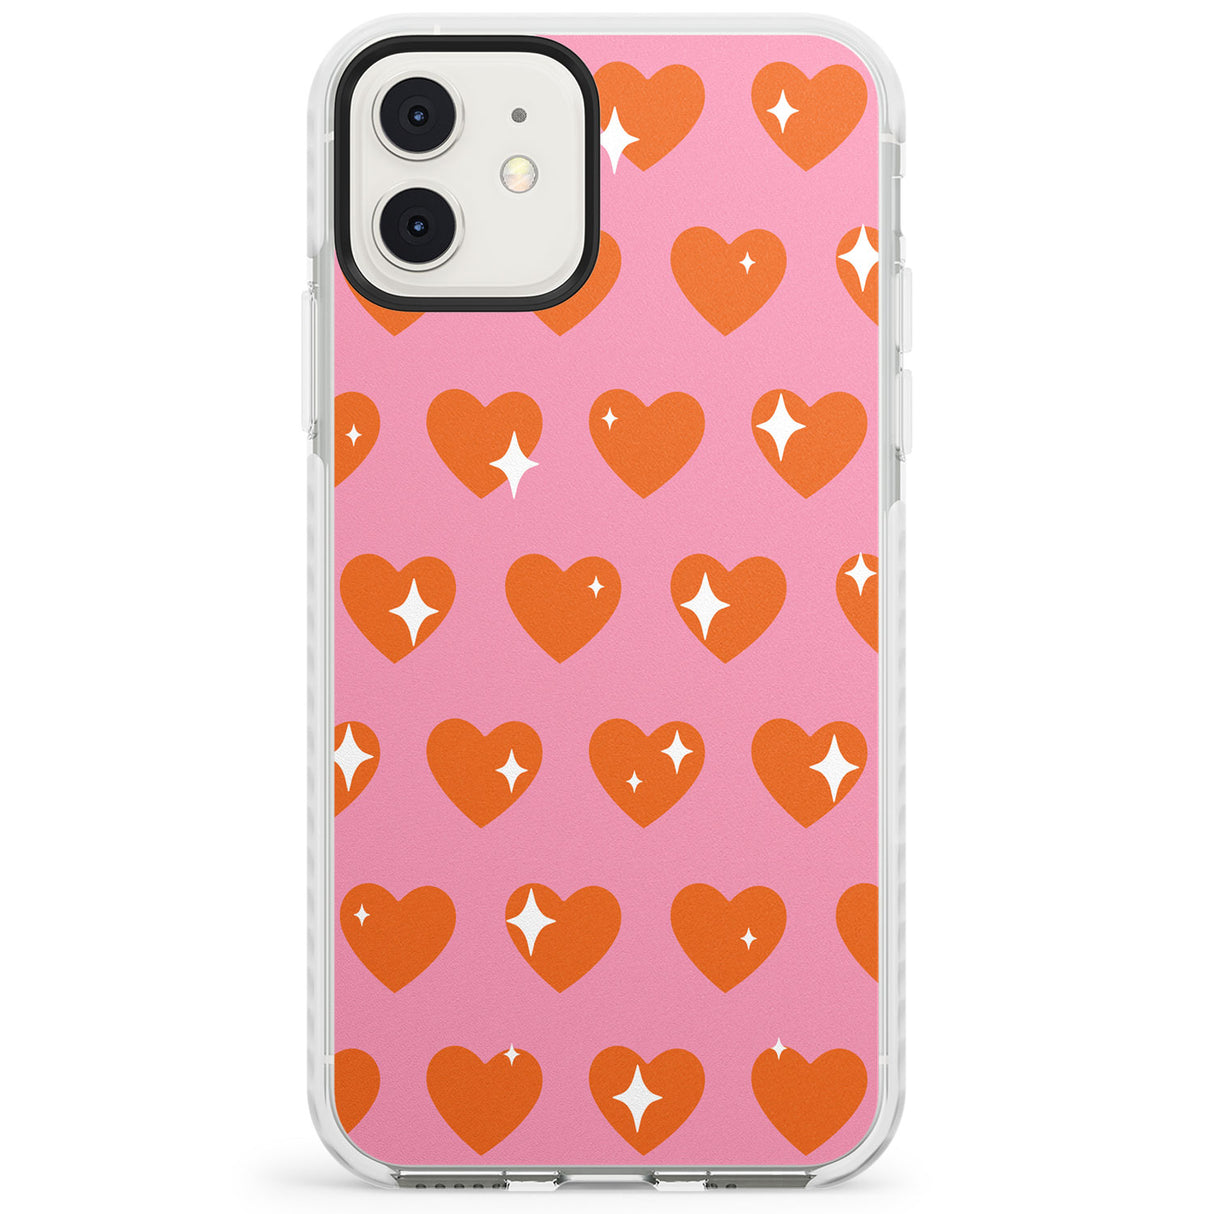 Sweet Hearts (Sunset) Impact Phone Case for iPhone 11, iphone 12